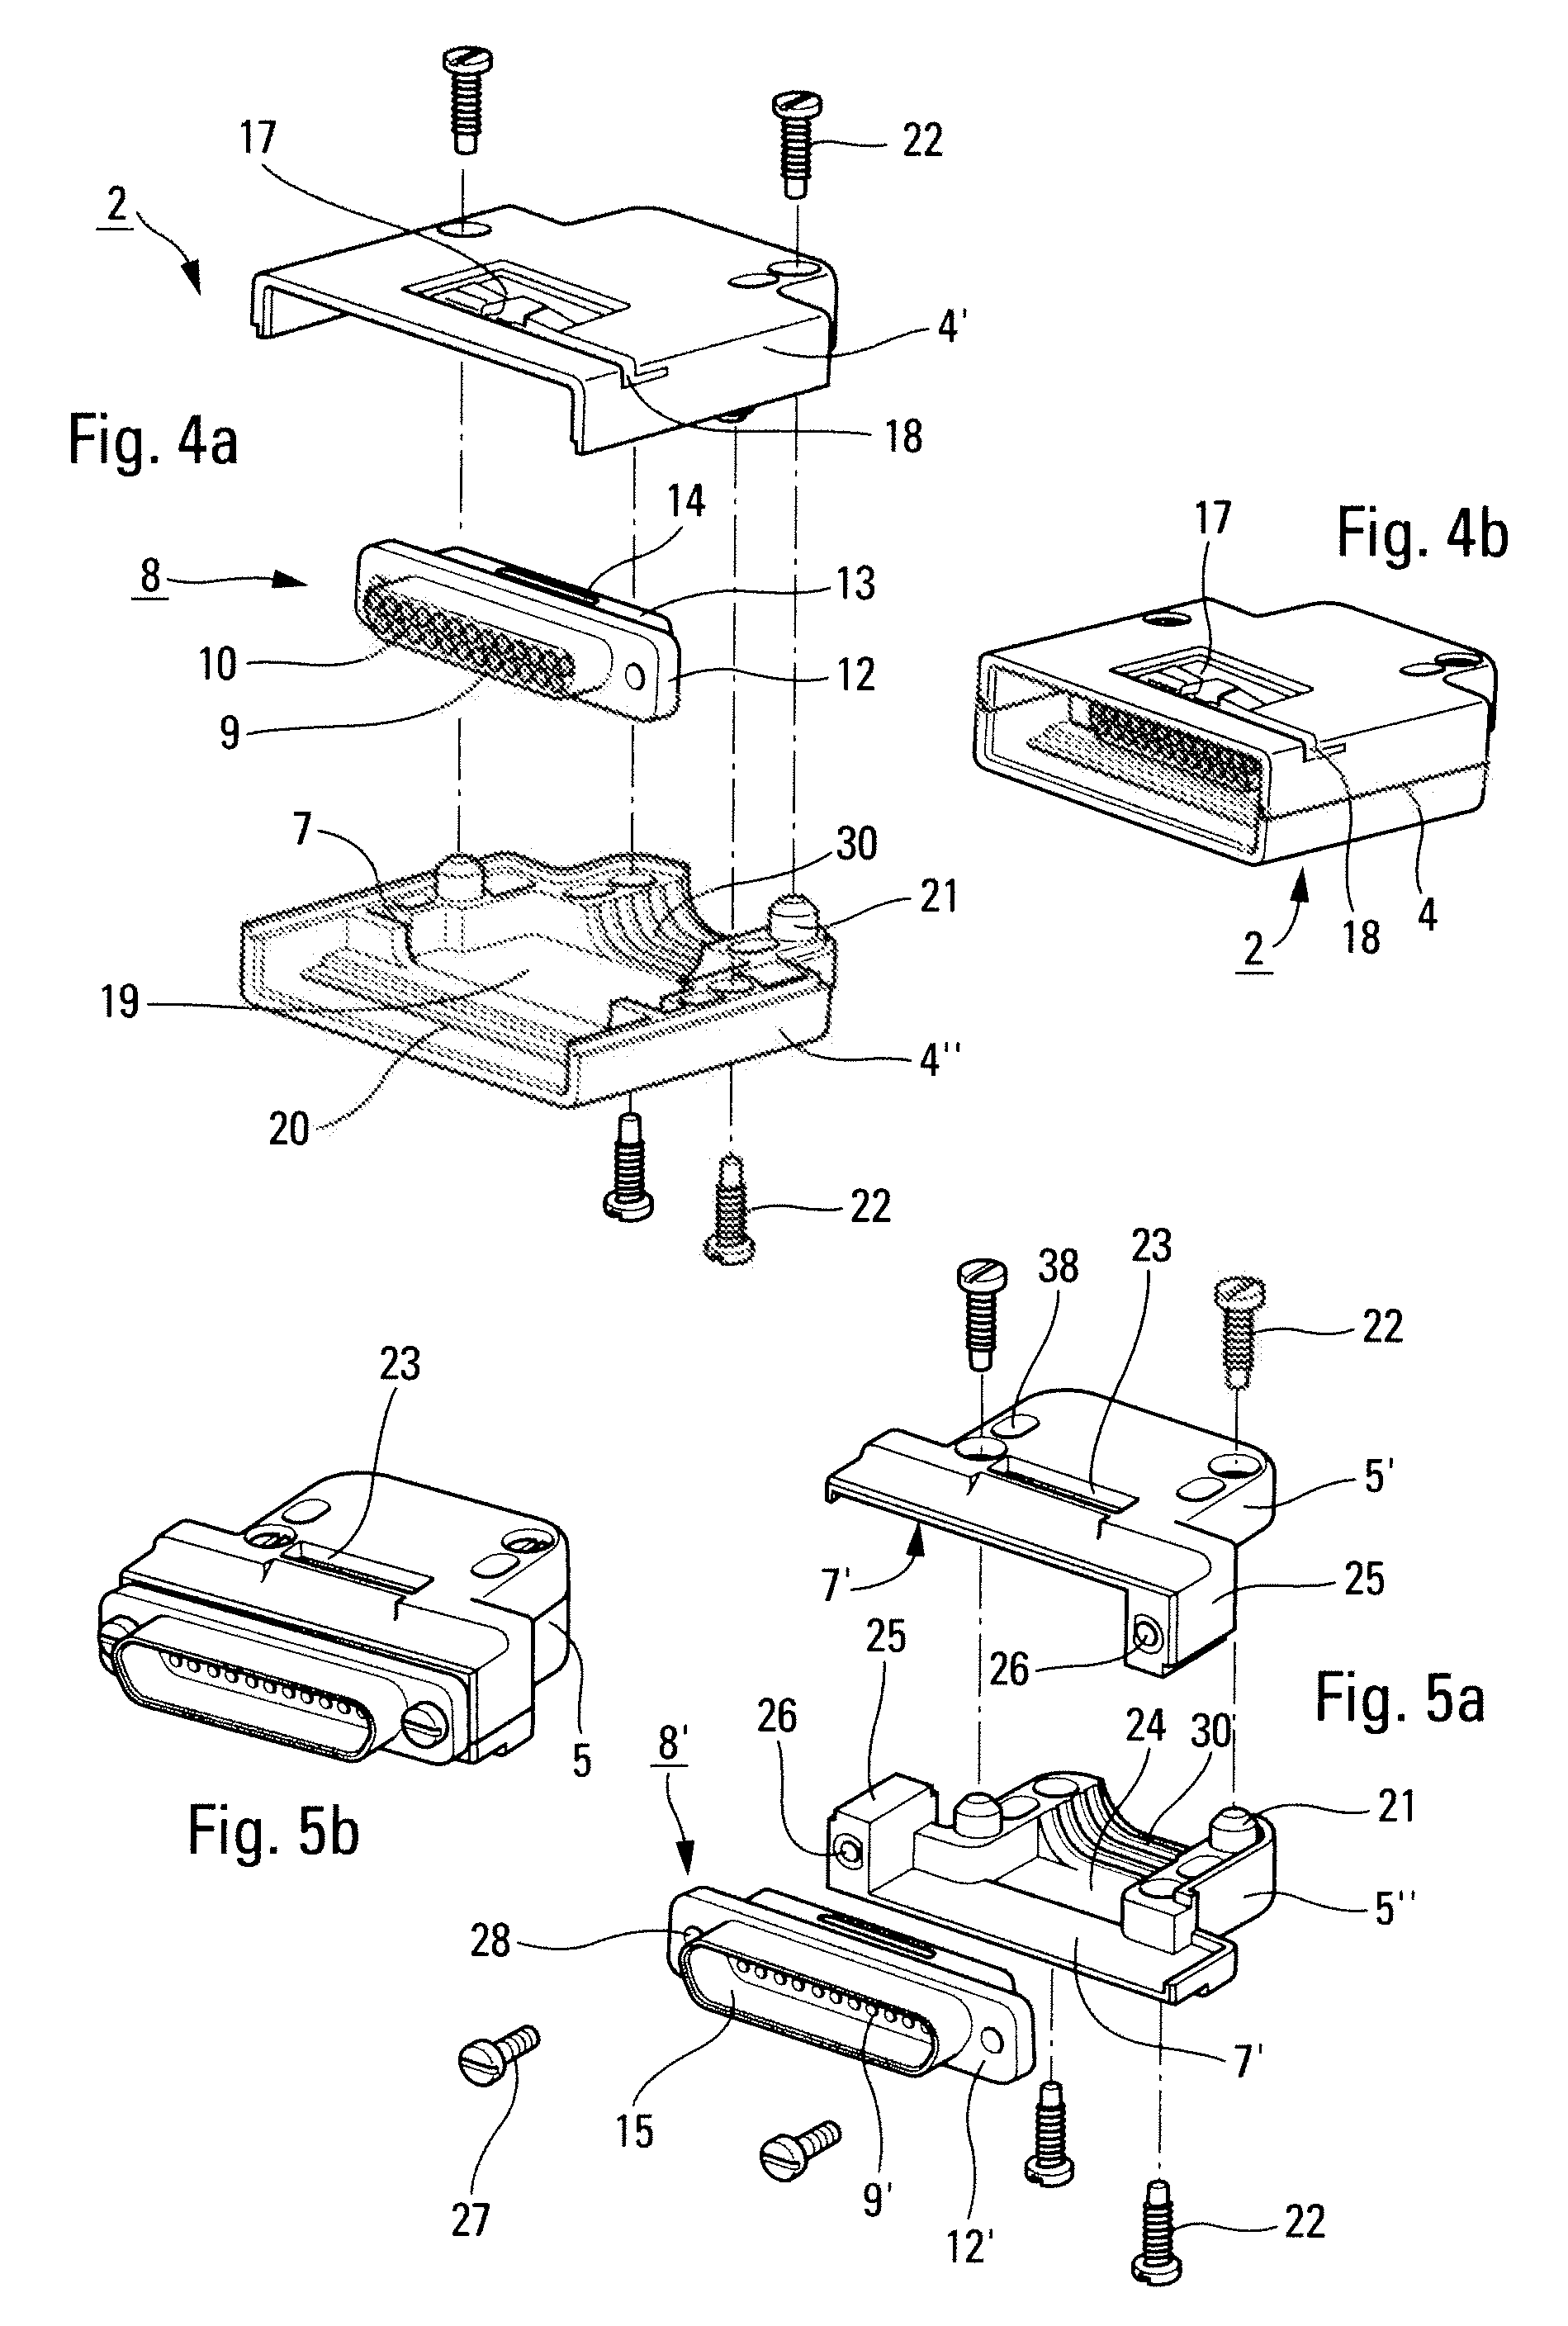 Locking device for a shielded sub-miniature connection assembly